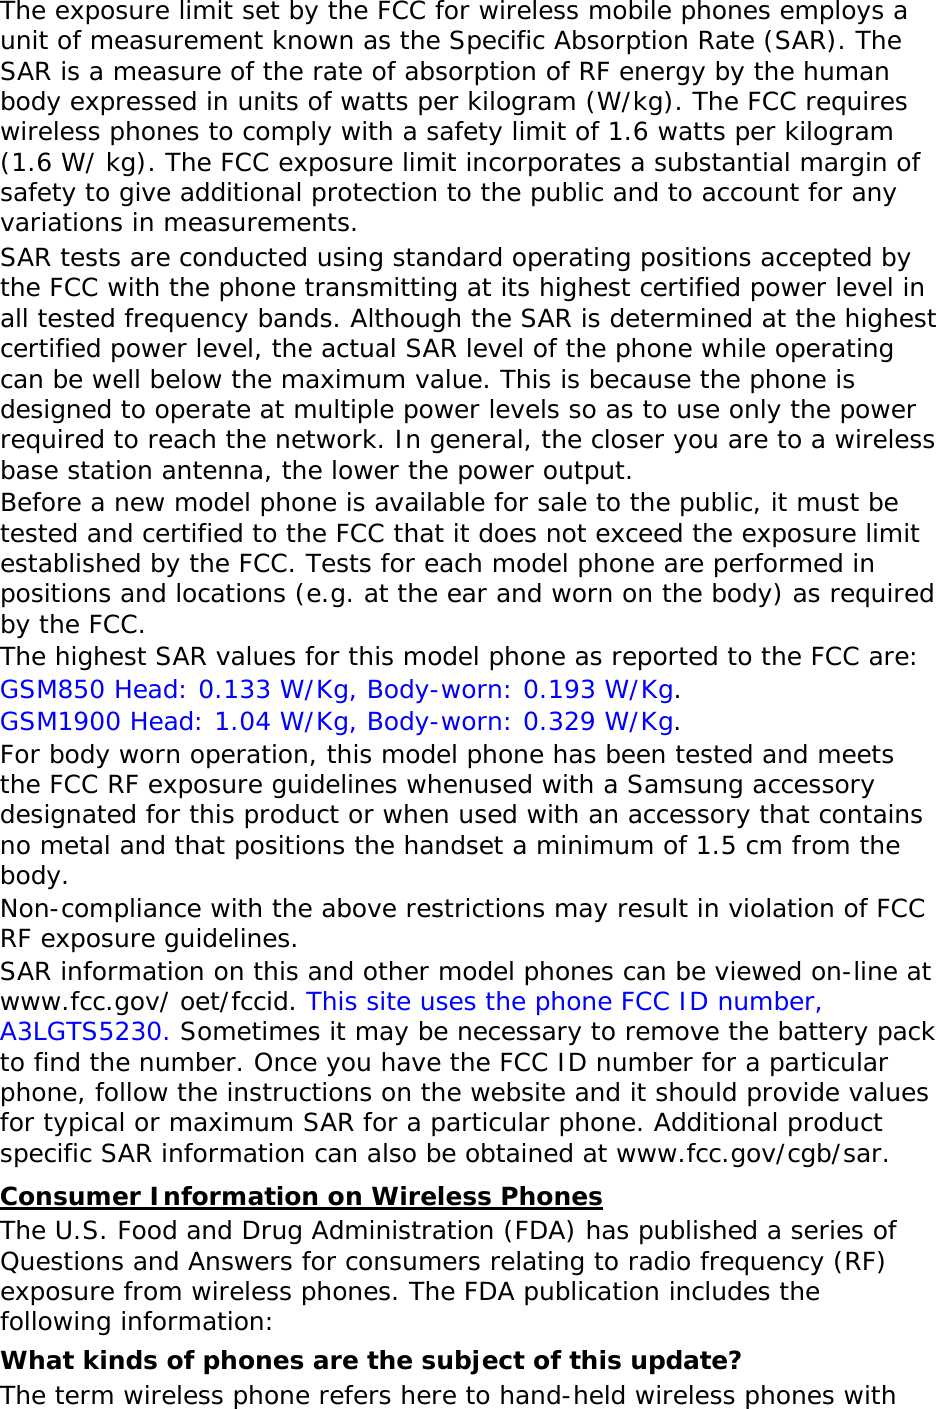 The exposure limit set by the FCC for wireless mobile phones employs a unit of measurement known as the Specific Absorption Rate (SAR). The SAR is a measure of the rate of absorption of RF energy by the human body expressed in units of watts per kilogram (W/kg). The FCC requires wireless phones to comply with a safety limit of 1.6 watts per kilogram (1.6 W/ kg). The FCC exposure limit incorporates a substantial margin of safety to give additional protection to the public and to account for any variations in measurements. SAR tests are conducted using standard operating positions accepted by the FCC with the phone transmitting at its highest certified power level in all tested frequency bands. Although the SAR is determined at the highest certified power level, the actual SAR level of the phone while operating can be well below the maximum value. This is because the phone is designed to operate at multiple power levels so as to use only the power required to reach the network. In general, the closer you are to a wireless base station antenna, the lower the power output. Before a new model phone is available for sale to the public, it must be tested and certified to the FCC that it does not exceed the exposure limit established by the FCC. Tests for each model phone are performed in positions and locations (e.g. at the ear and worn on the body) as required by the FCC.   The highest SAR values for this model phone as reported to the FCC are:  GSM850 Head: 0.133 W/Kg, Body-worn: 0.193 W/Kg. GSM1900 Head: 1.04 W/Kg, Body-worn: 0.329 W/Kg. For body worn operation, this model phone has been tested and meets the FCC RF exposure guidelines whenused with a Samsung accessory designated for this product or when used with an accessory that contains no metal and that positions the handset a minimum of 1.5 cm from the body.  Non-compliance with the above restrictions may result in violation of FCC RF exposure guidelines. SAR information on this and other model phones can be viewed on-line at www.fcc.gov/ oet/fccid. This site uses the phone FCC ID number, A3LGTS5230. Sometimes it may be necessary to remove the battery pack to find the number. Once you have the FCC ID number for a particular phone, follow the instructions on the website and it should provide values for typical or maximum SAR for a particular phone. Additional product specific SAR information can also be obtained at www.fcc.gov/cgb/sar. Consumer Information on Wireless Phones The U.S. Food and Drug Administration (FDA) has published a series of Questions and Answers for consumers relating to radio frequency (RF) exposure from wireless phones. The FDA publication includes the following information: What kinds of phones are the subject of this update? The term wireless phone refers here to hand-held wireless phones with 